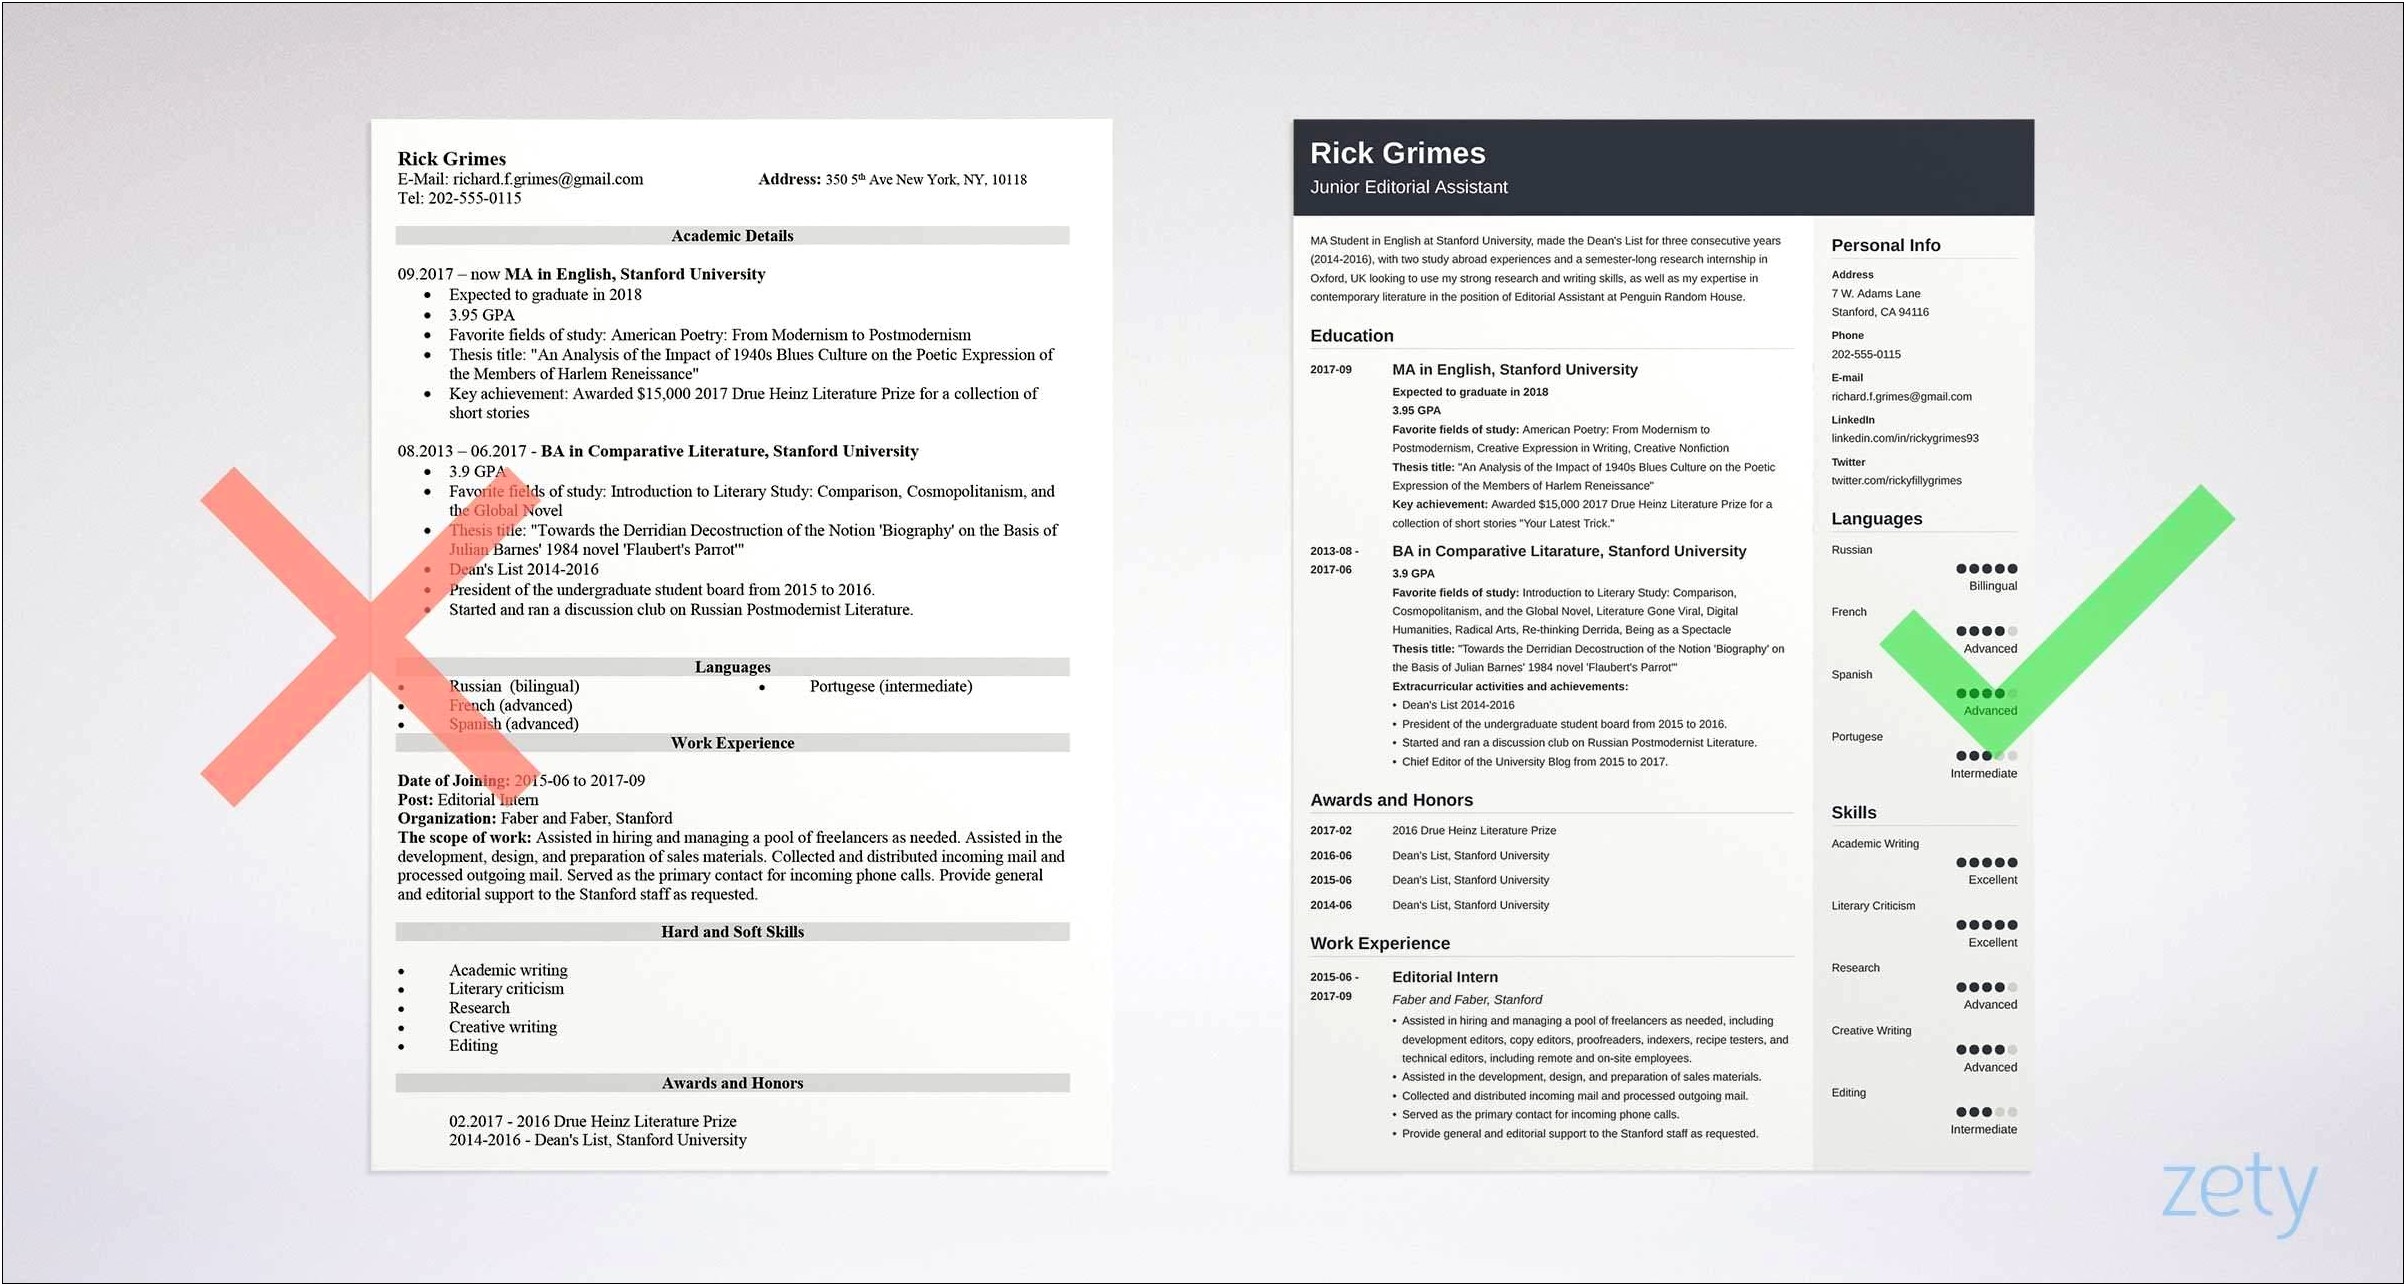 Resume Sample Without Work Experience